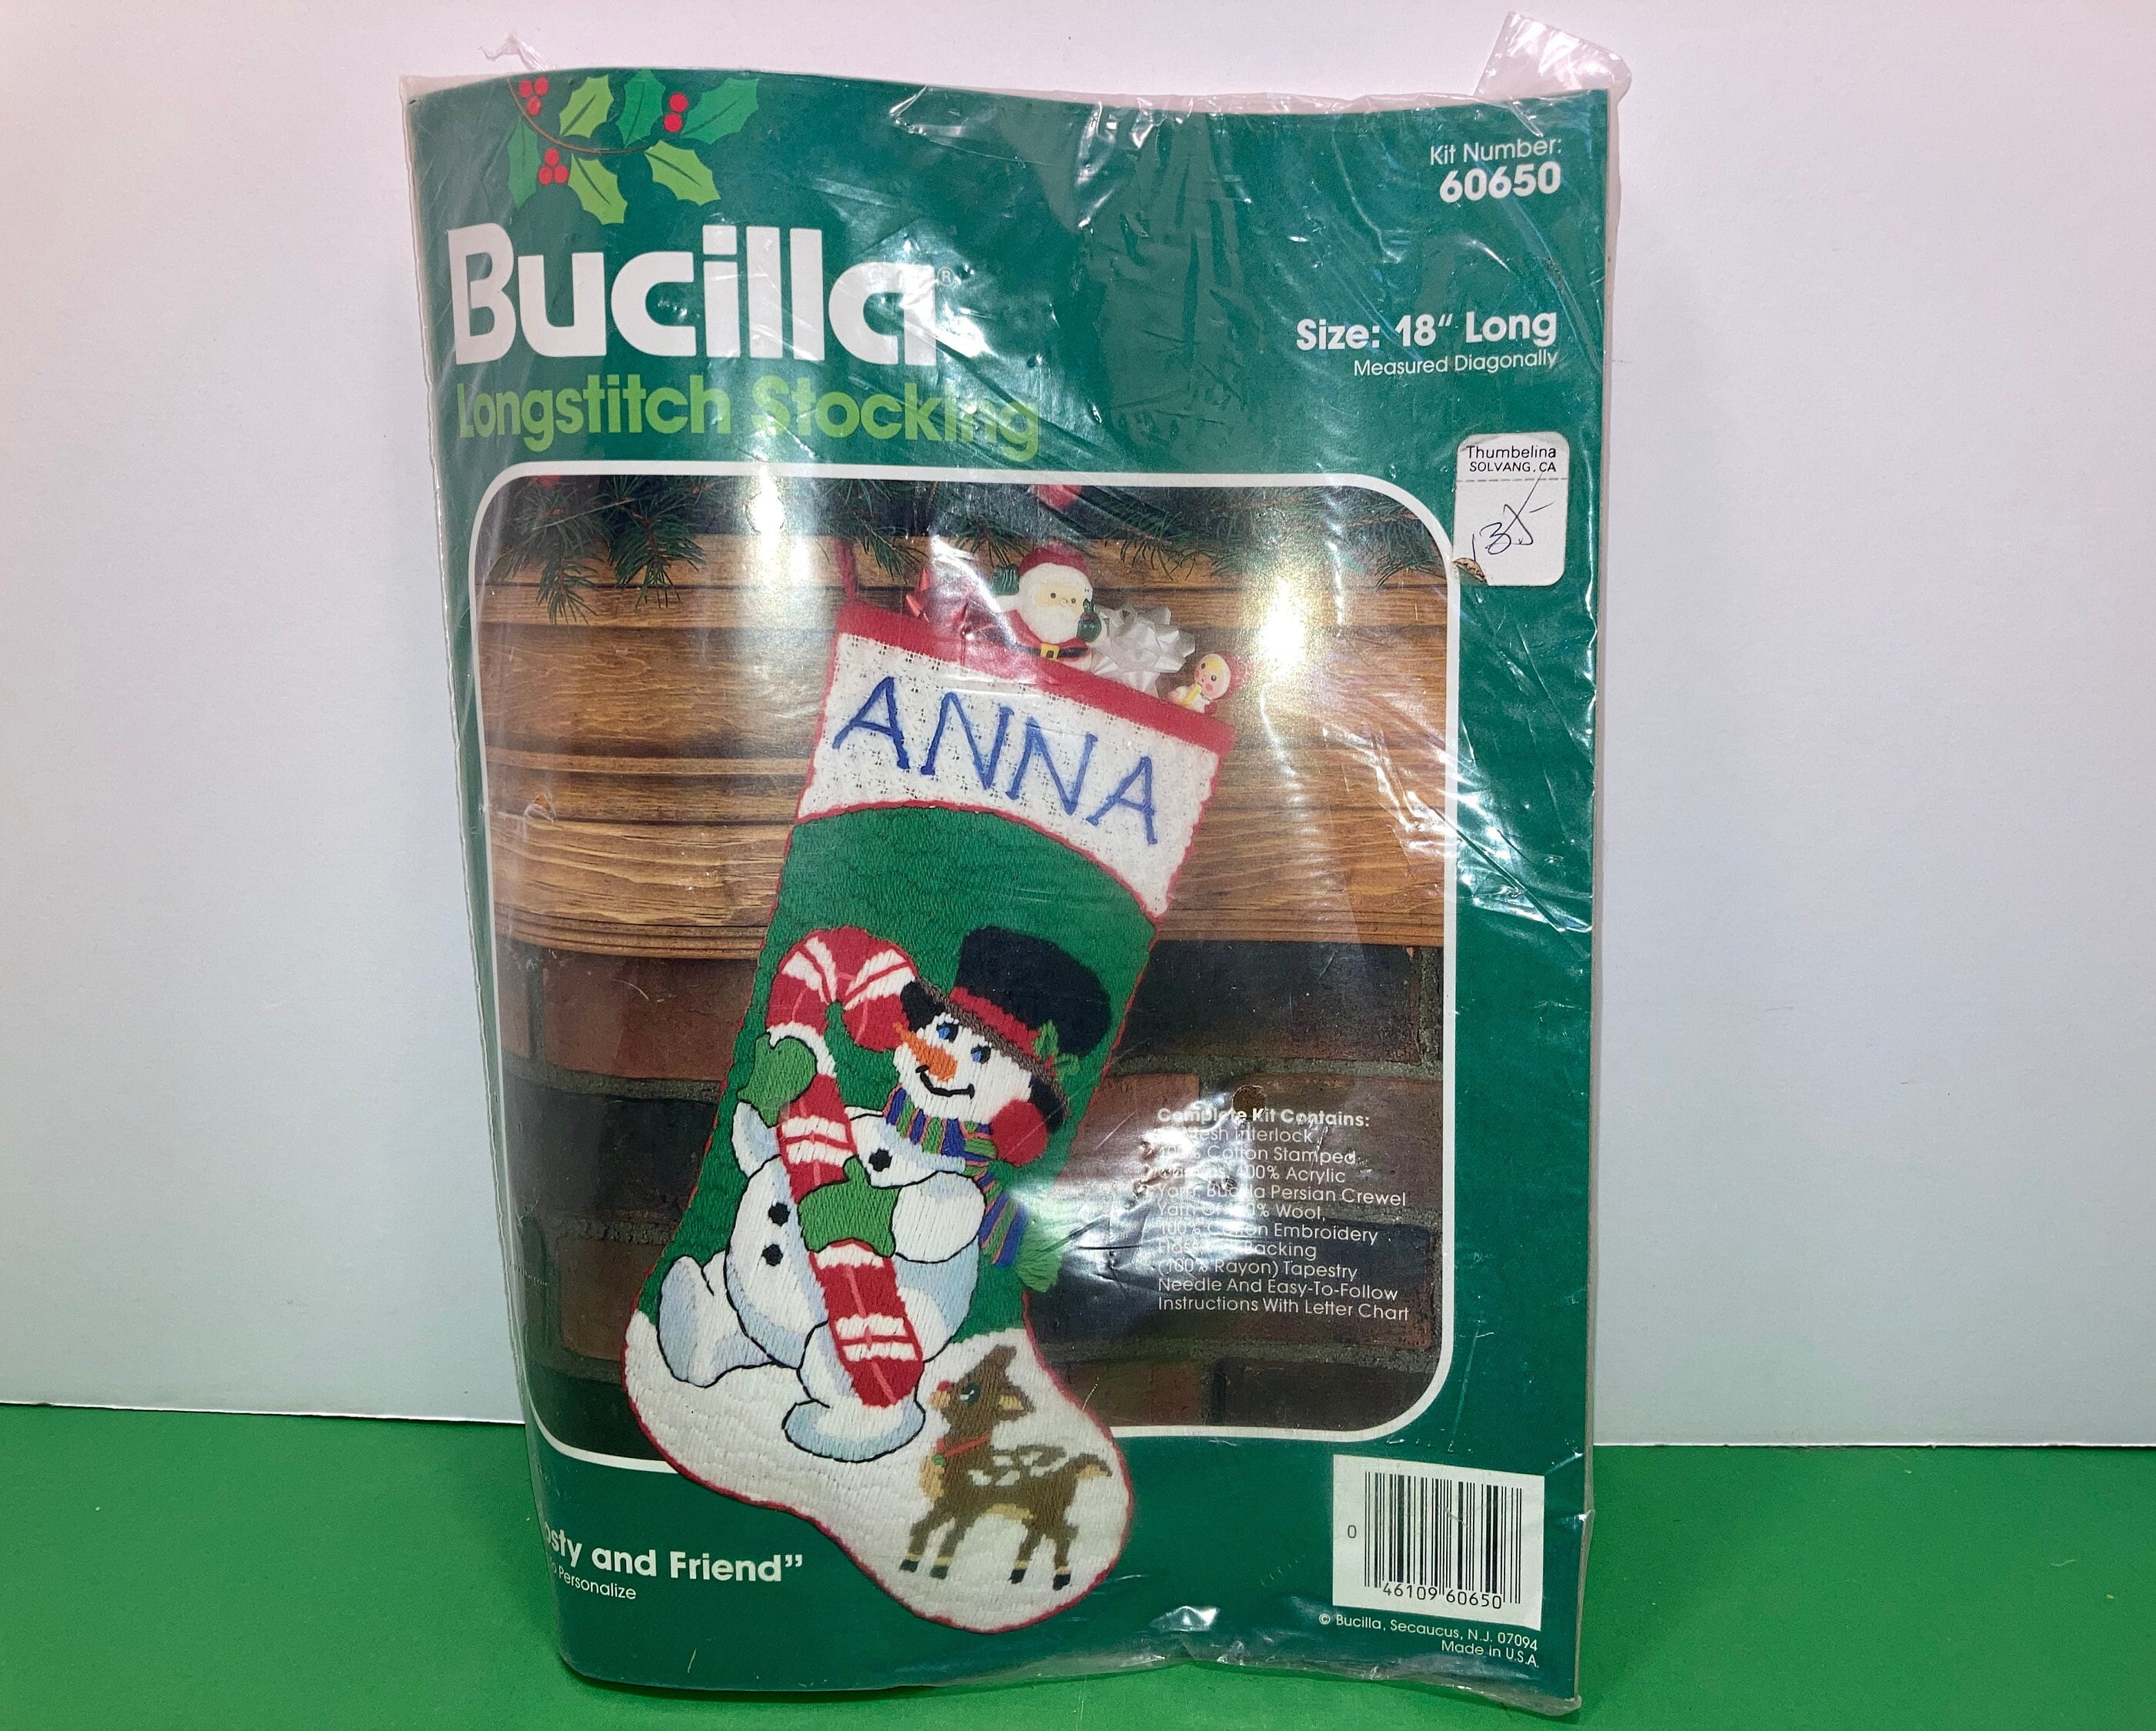 Plaid Bucilla Christmas choice felt stocking kits see pictures and